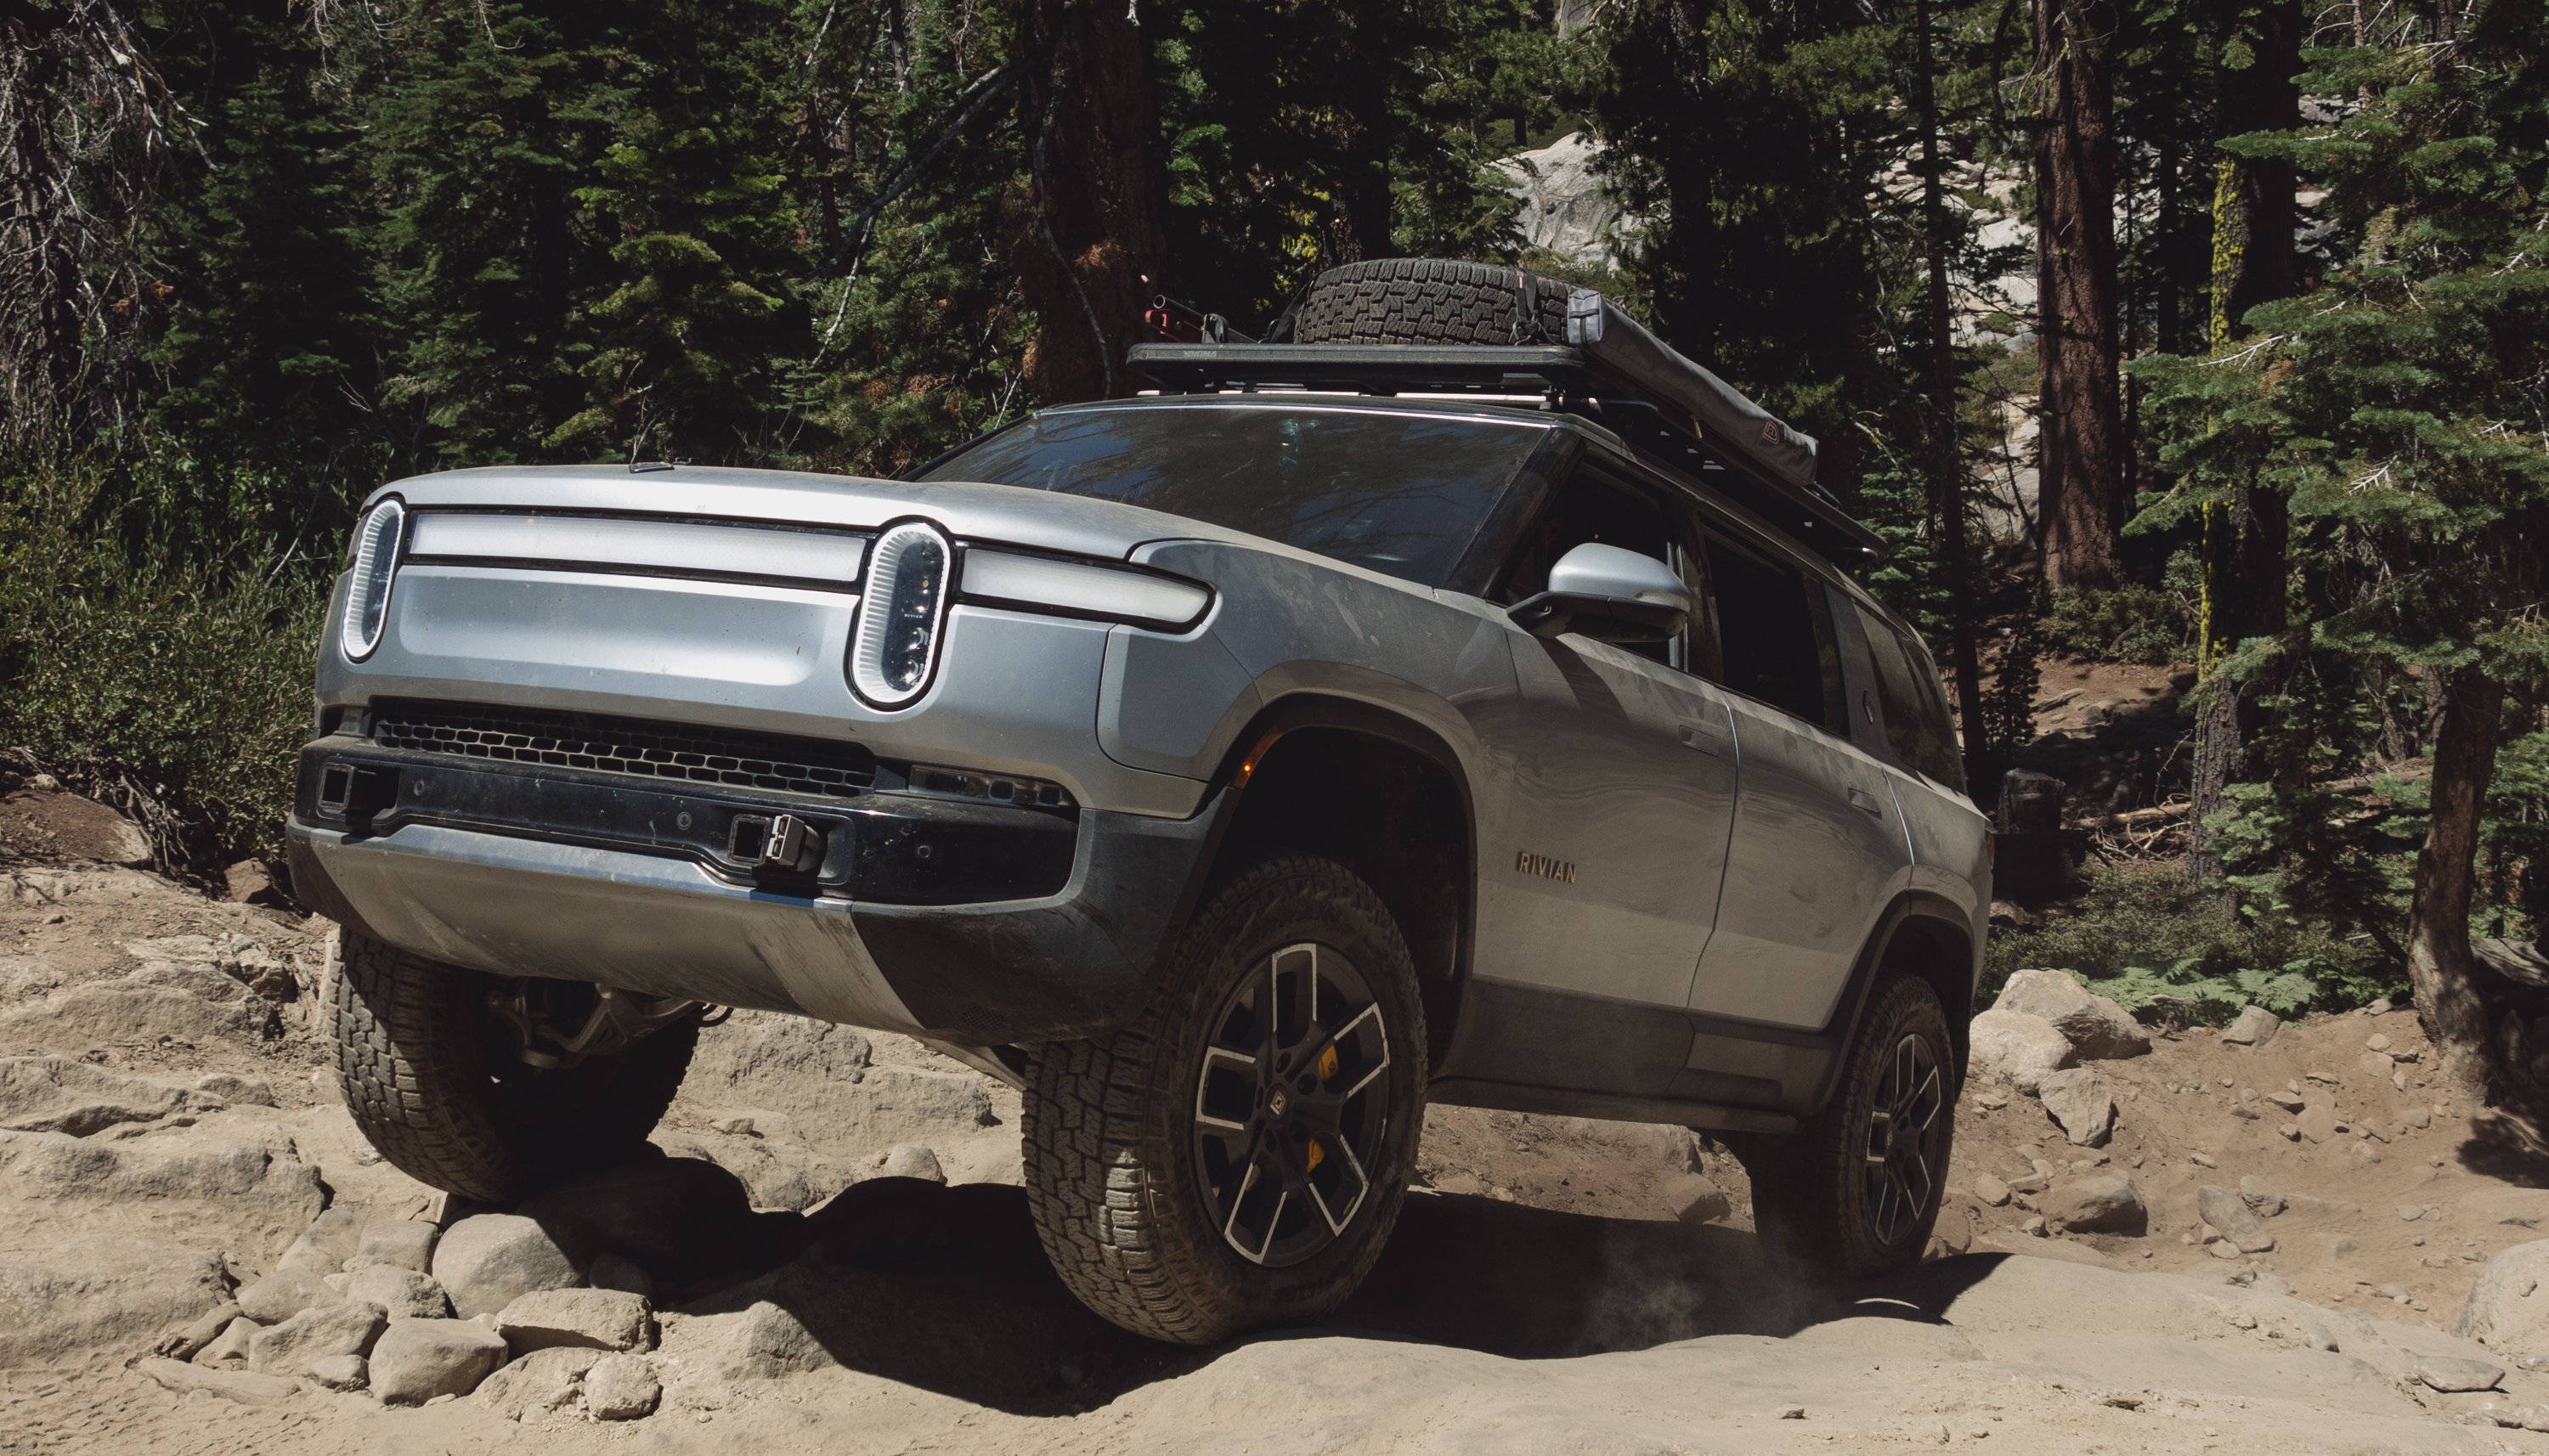 Read RIVIAN VEHICLES GET FIRST CHARGE FROM ON-SITE RENEWABLE ENERGY by Rivian